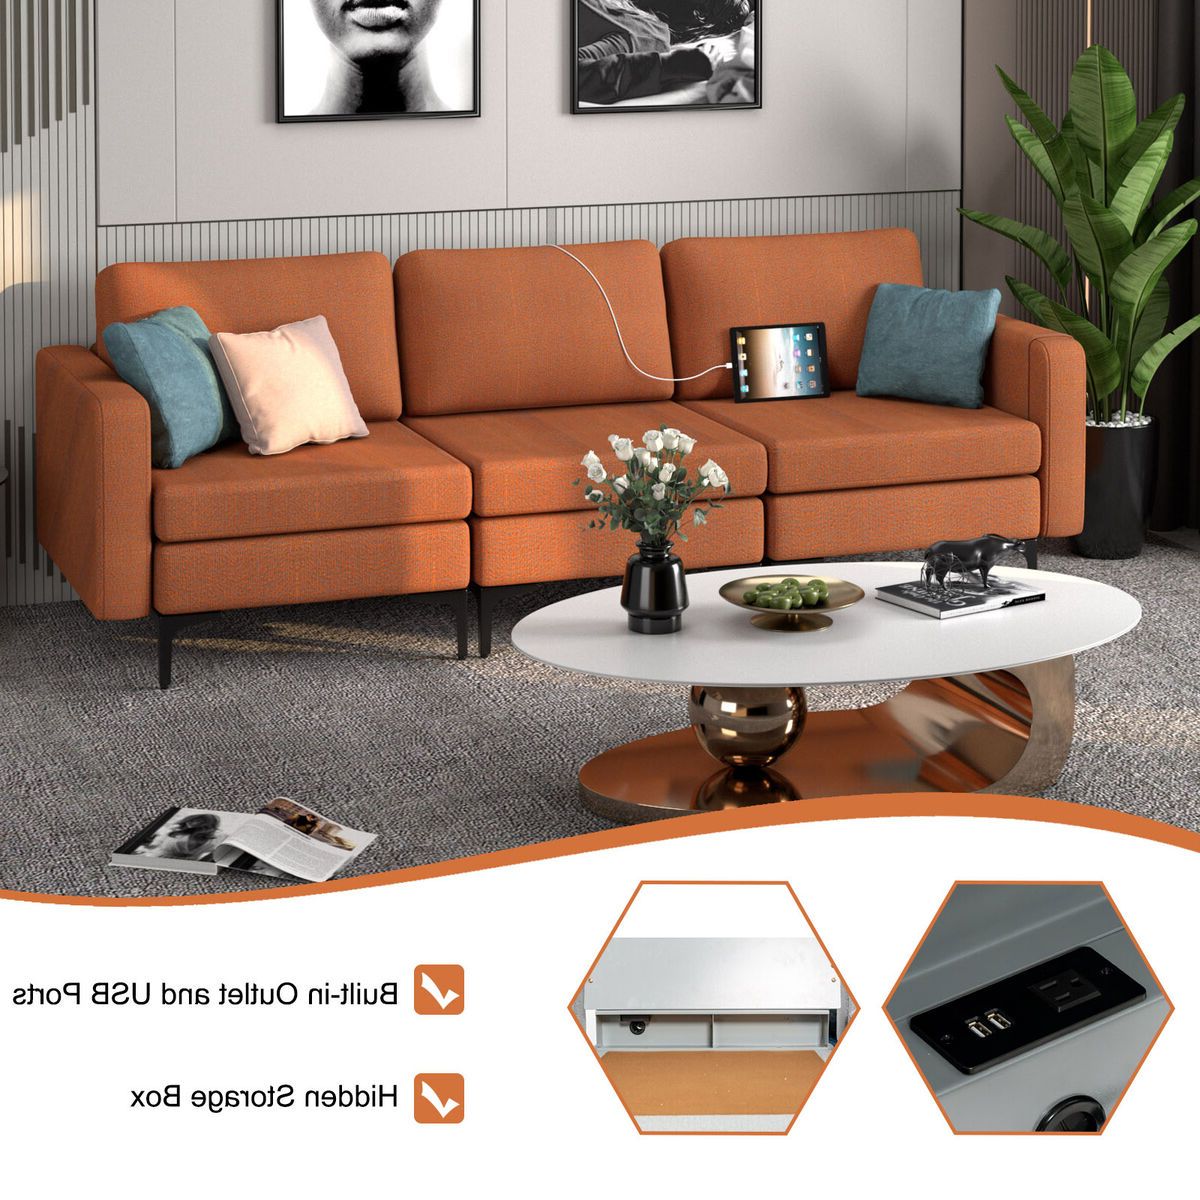 Modular L Shaped 3 Seat Sofa Couch W/ Seat Cushion & Socket & 2 Ubs  Ports Orange | Ebay Within 3 Seat L Shape Sofa Couches With 2 Usb Ports (View 16 of 20)